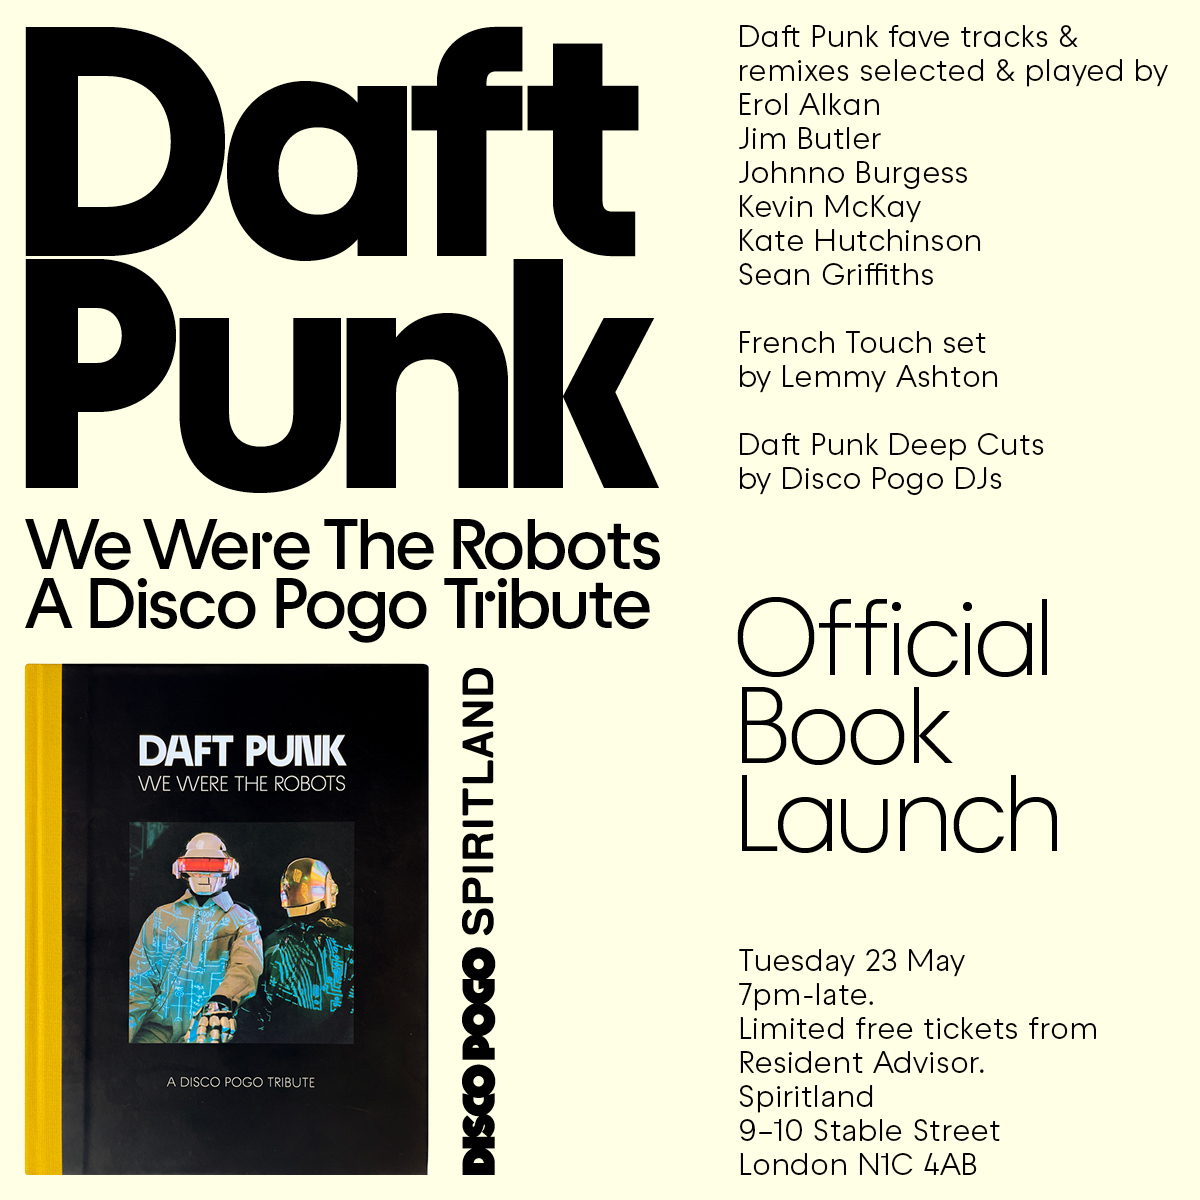 This is tomorrow @spiritland! 🤖🤖 Playing times are: 7pm: Doors open and Daft Punk deep cuts Playing their fave Daft Punk tracks: 7.30pm: Johnno 8pm: Jim Butler 8.25pm: Erol Alkan 8.50pm: Sean Griffiths 9.15pm: Kevin McKay 9.40pm: @katehutchinson (Teachers set) 10.05:…